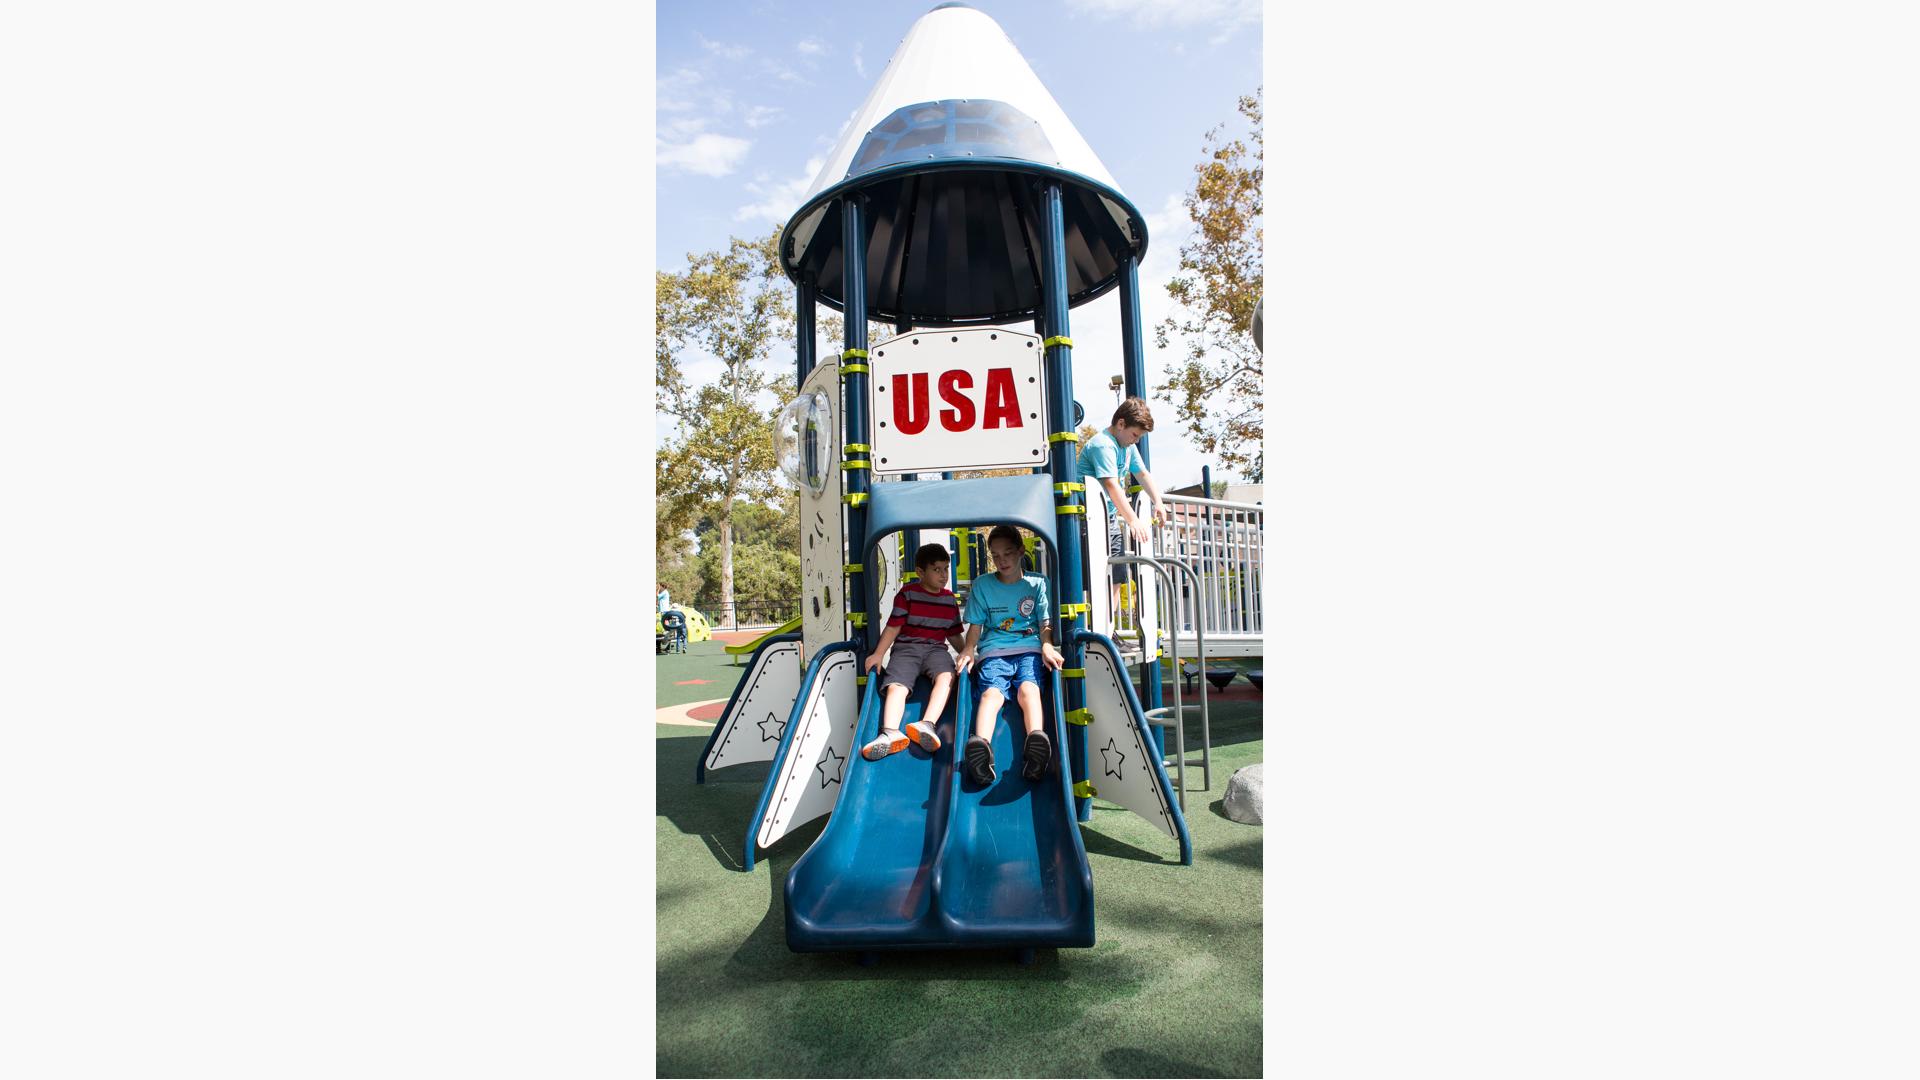 Unique Rocket Shaped Outdoor Big Tall Stainless Steel Slides